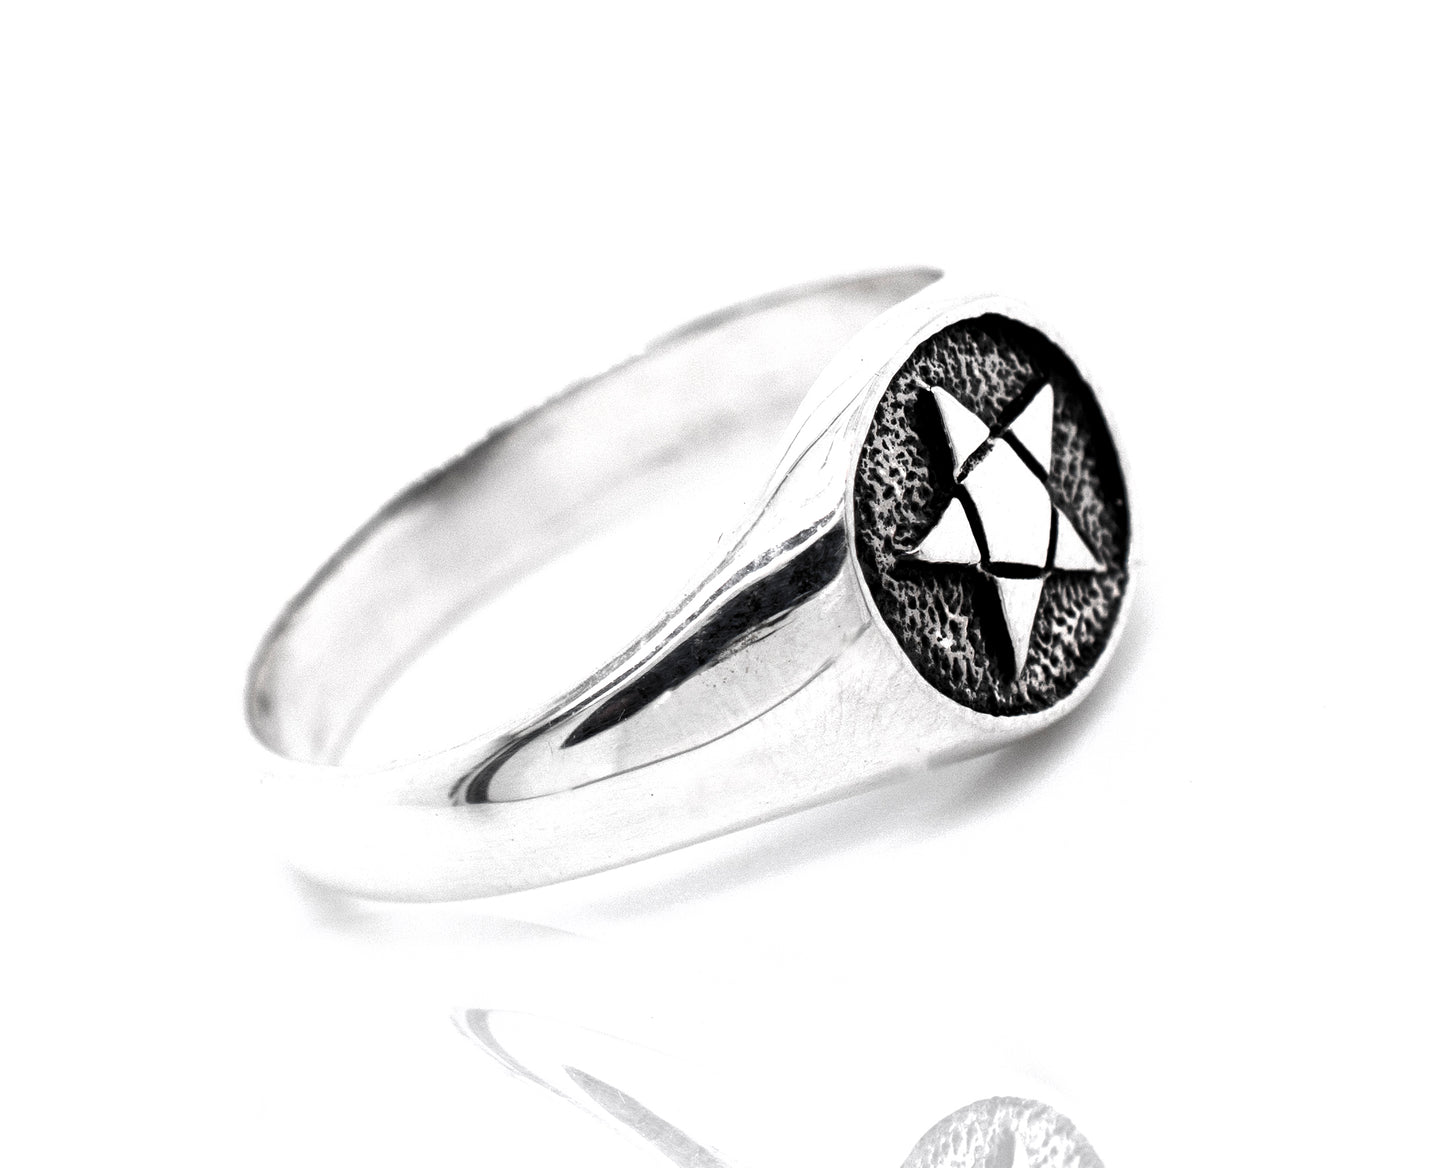 A silver signet ring with a star, perfect for those with a gothic style or a fascination with the Pentagram Ring.